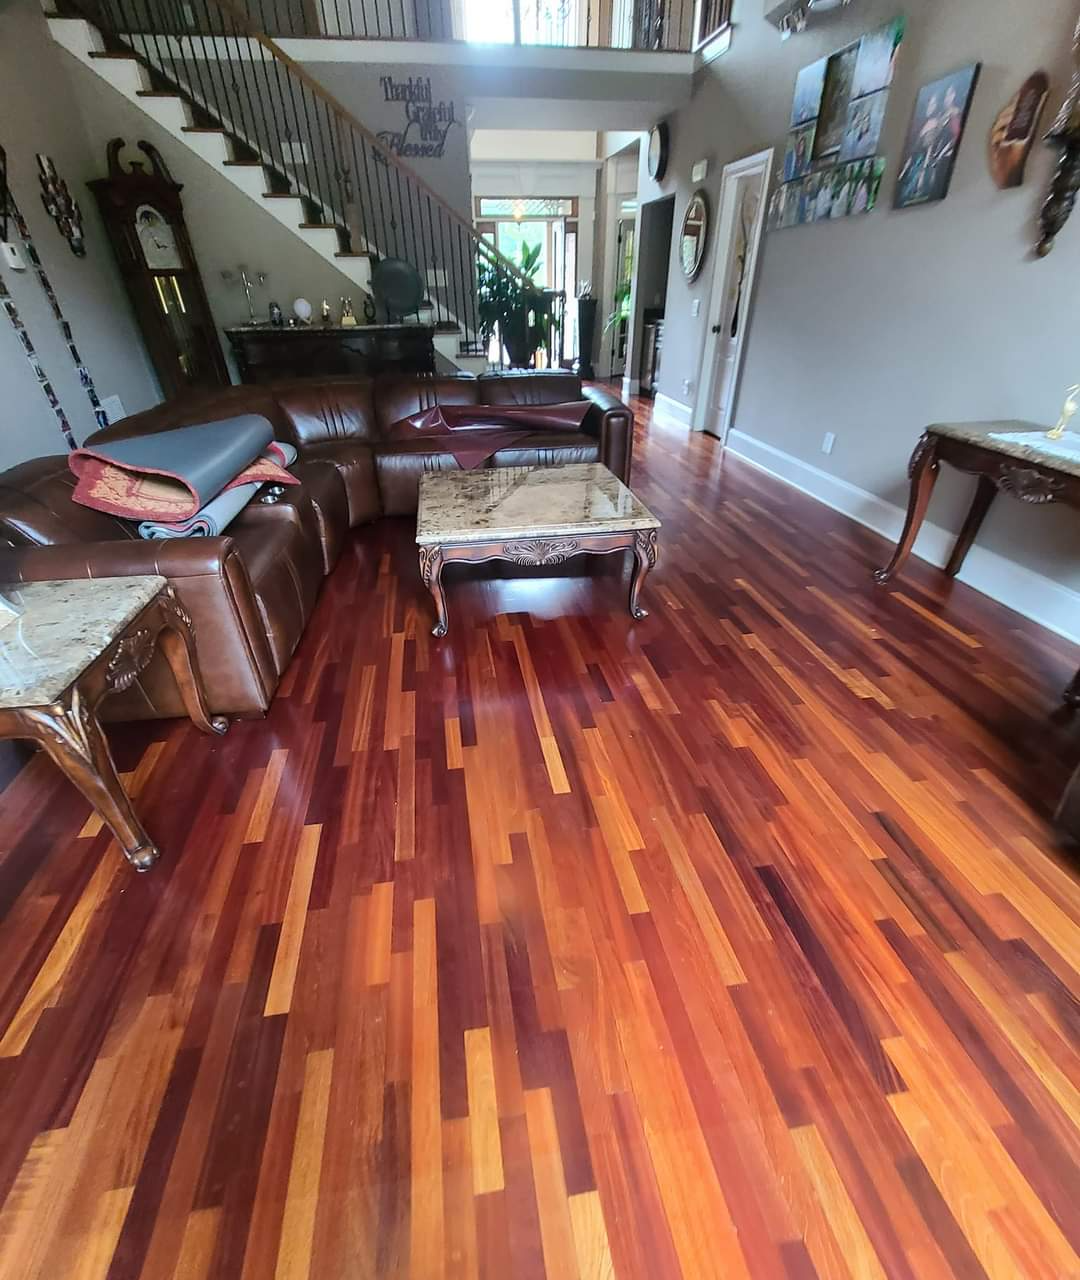 The hardwood floor has been installed, stained and polished for a completely finished look.